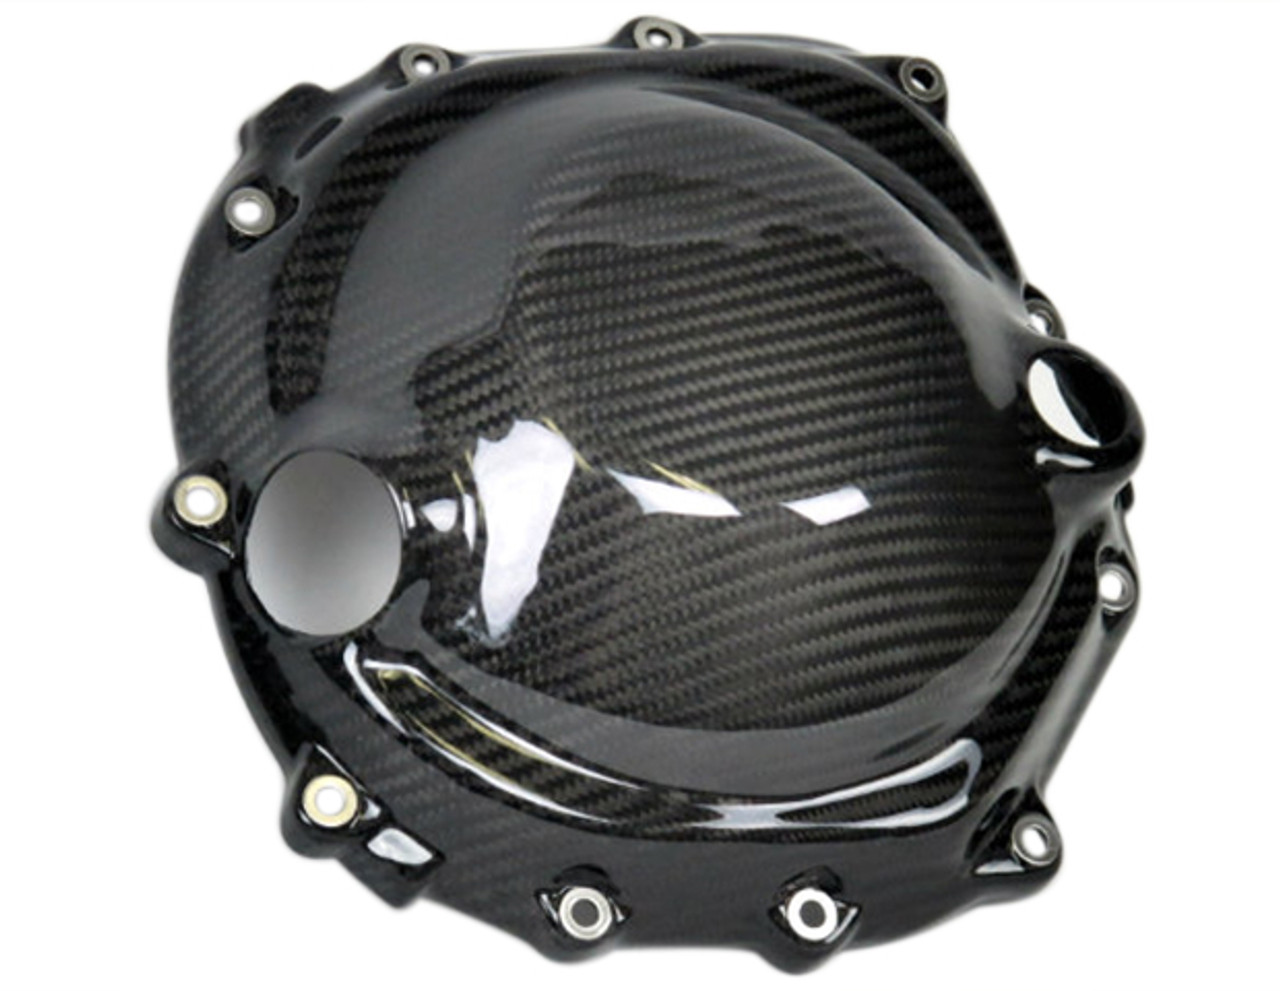 Clutch Cover in 100% Carbon Fiber for Kawasaki ZX14-ZZR1400 2006+